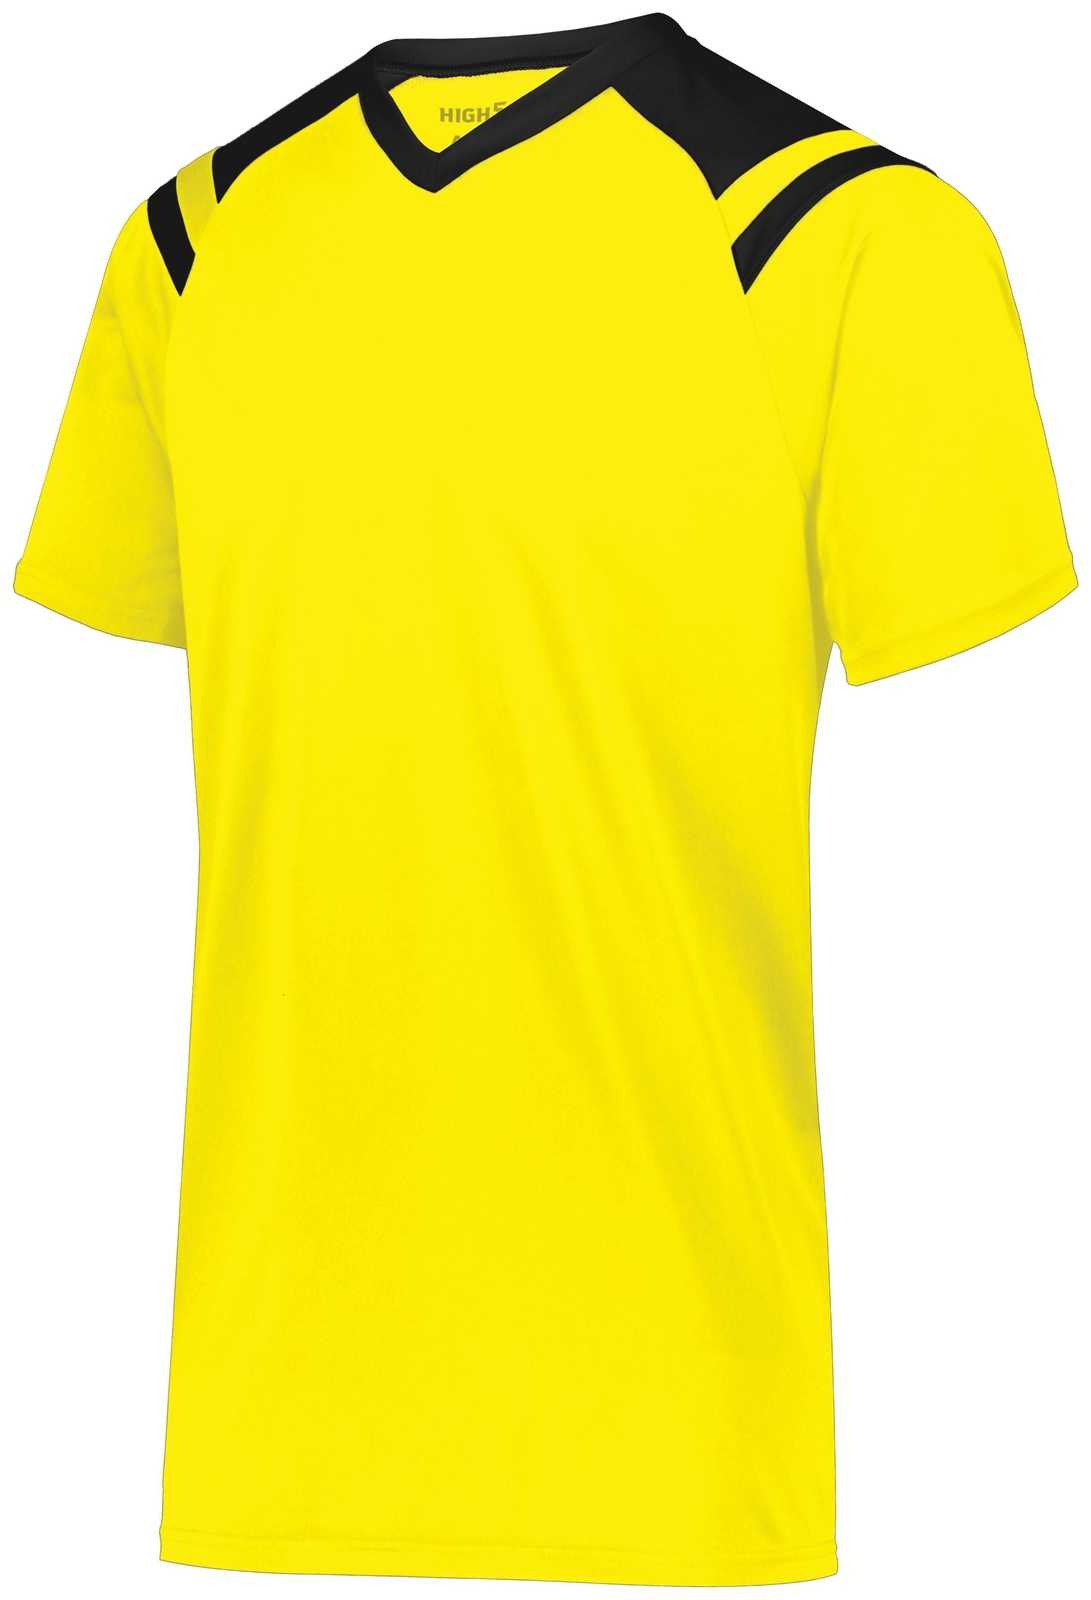 High Five 322971 Youth Sheffield Jersey - Electric Yellow Black - HIT a Double